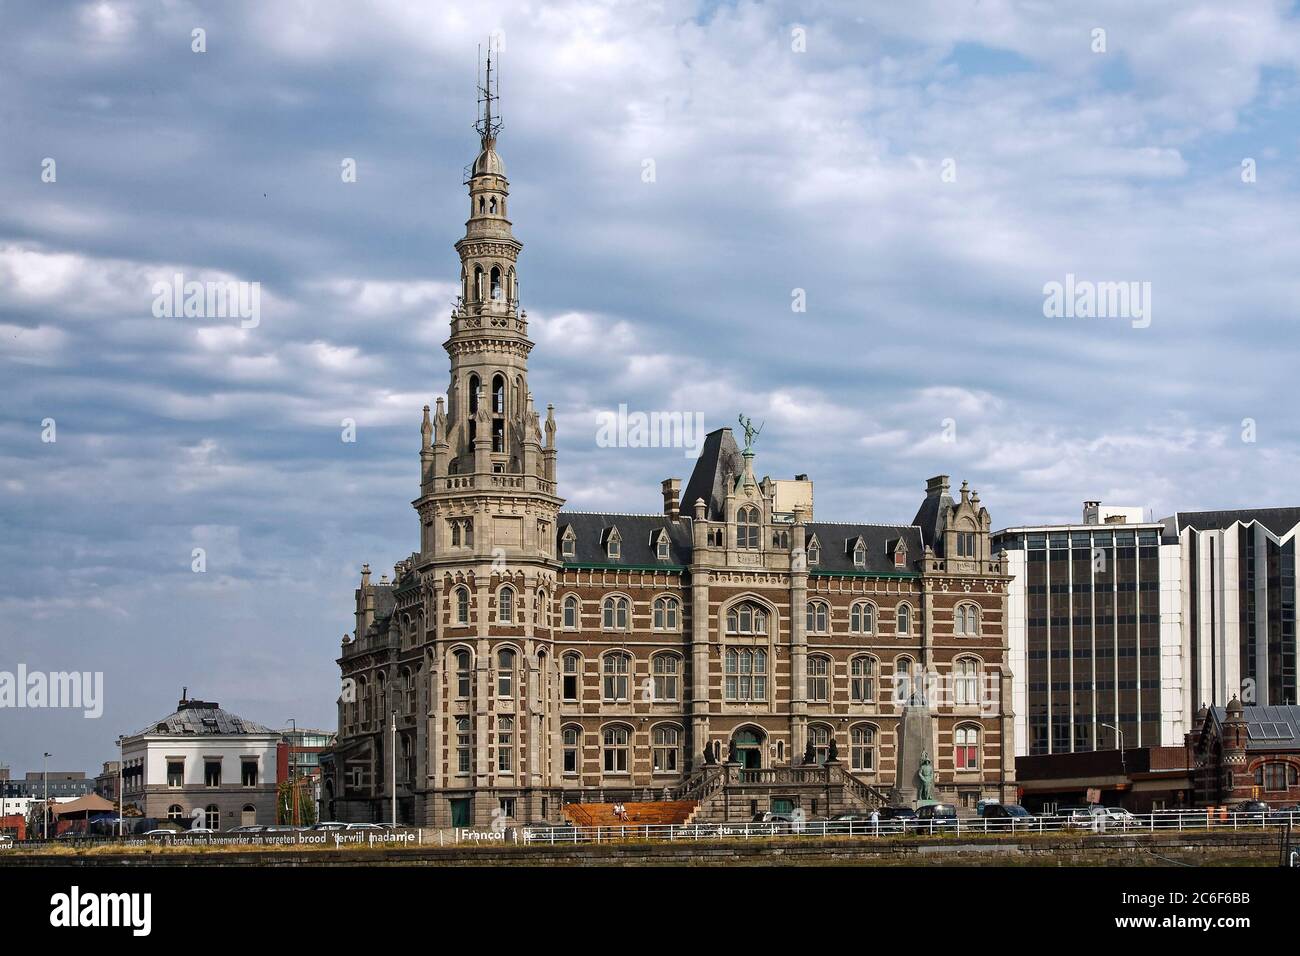 Pilotage Authority Building; 1894; ornate, old, spire, many windows, double staircase, cityscape, Flanders; Europe; Antwerp; Belgium Stock Photo